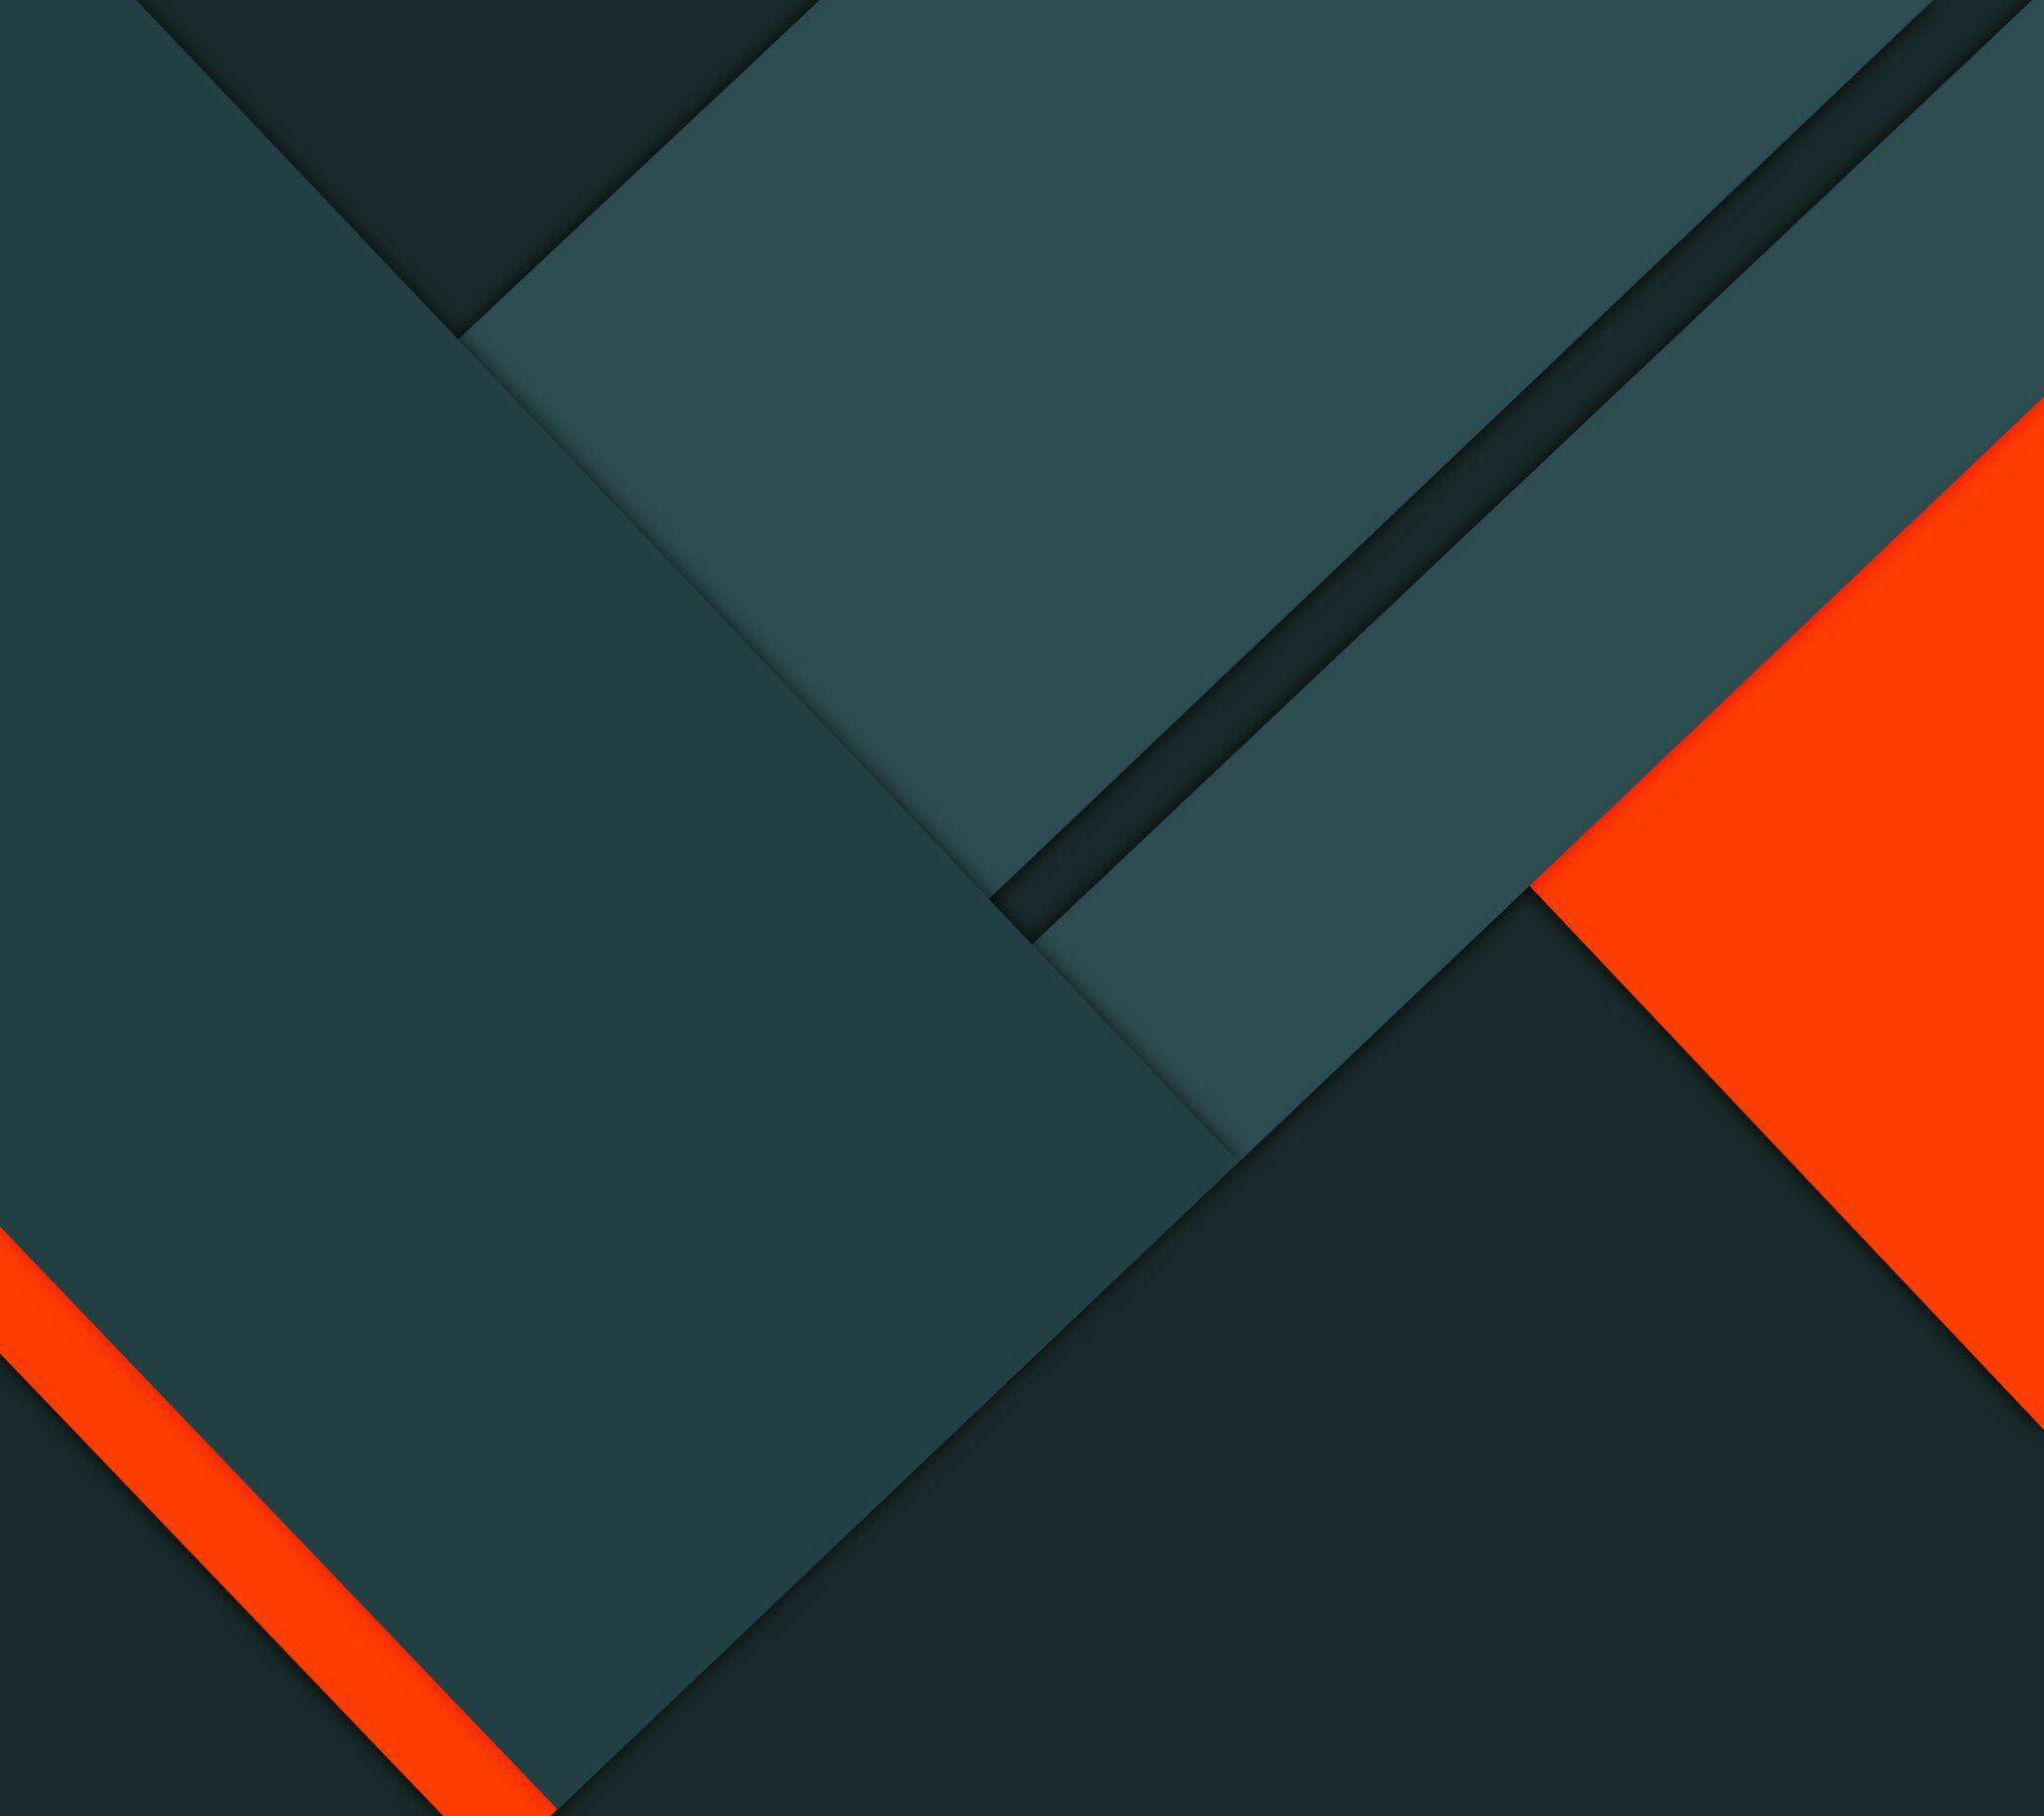 Ultimate Material Design inspired wallpaper collection